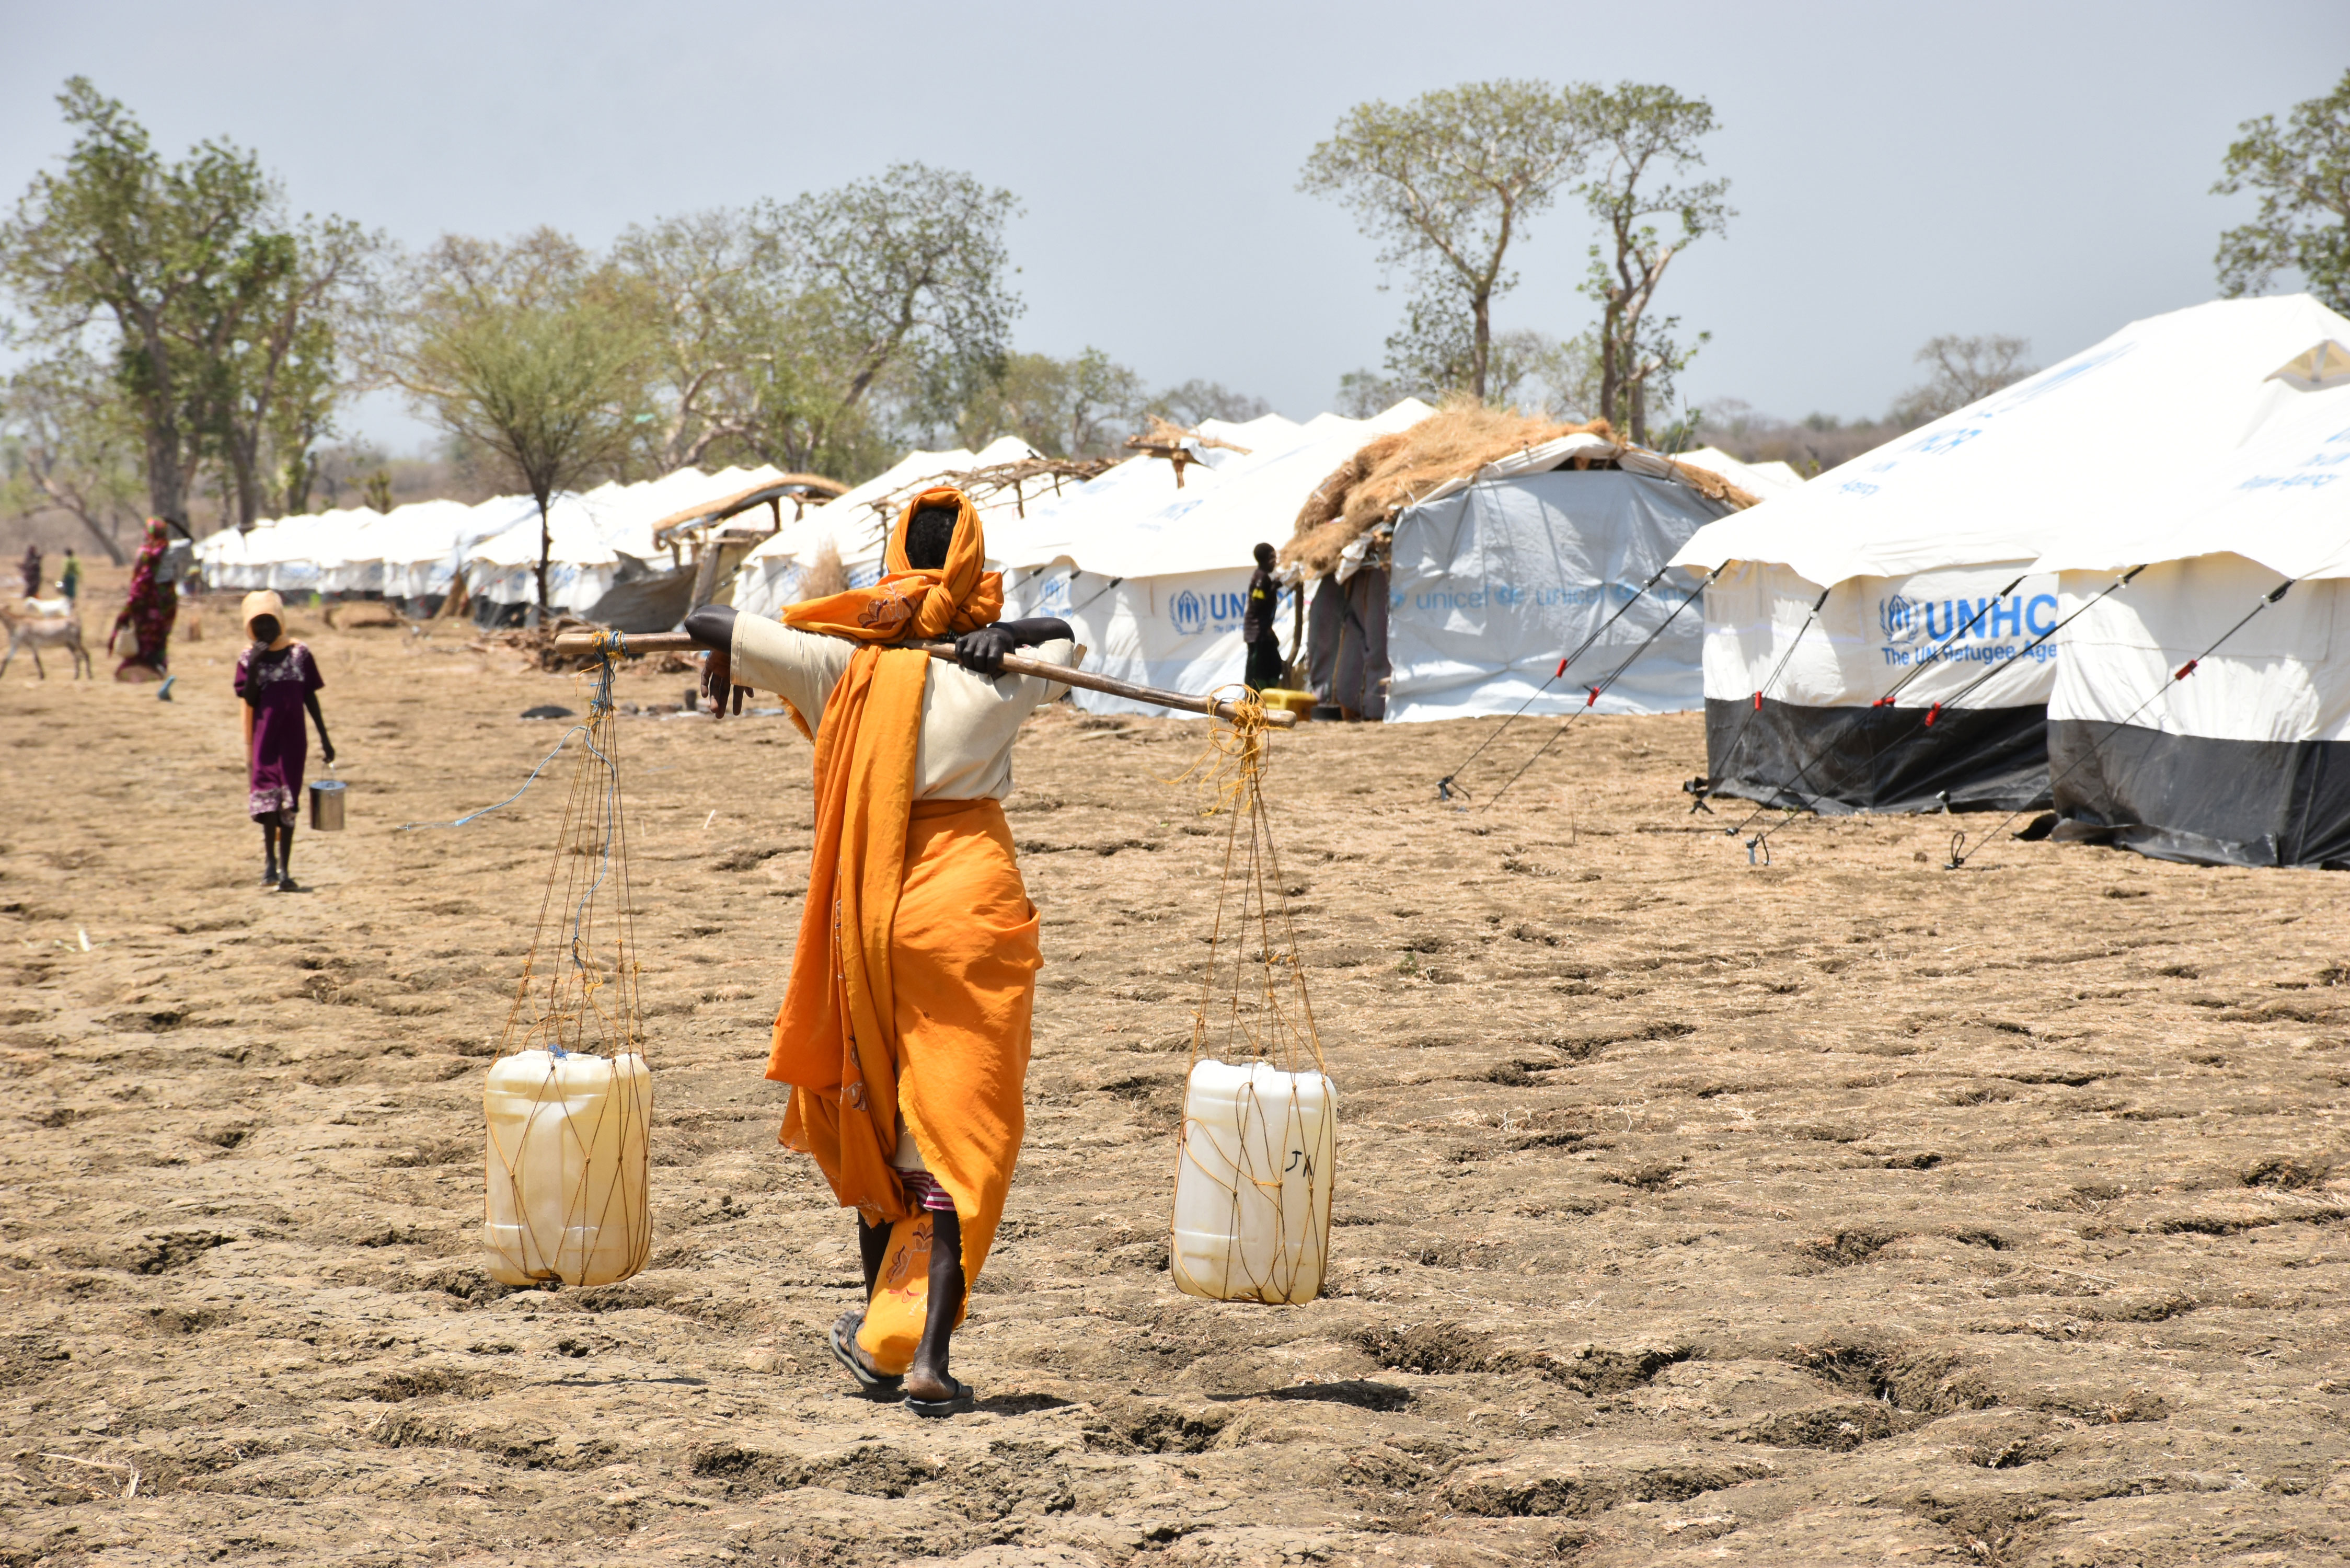 World Vision is on the ground providing emergency support to refugees.